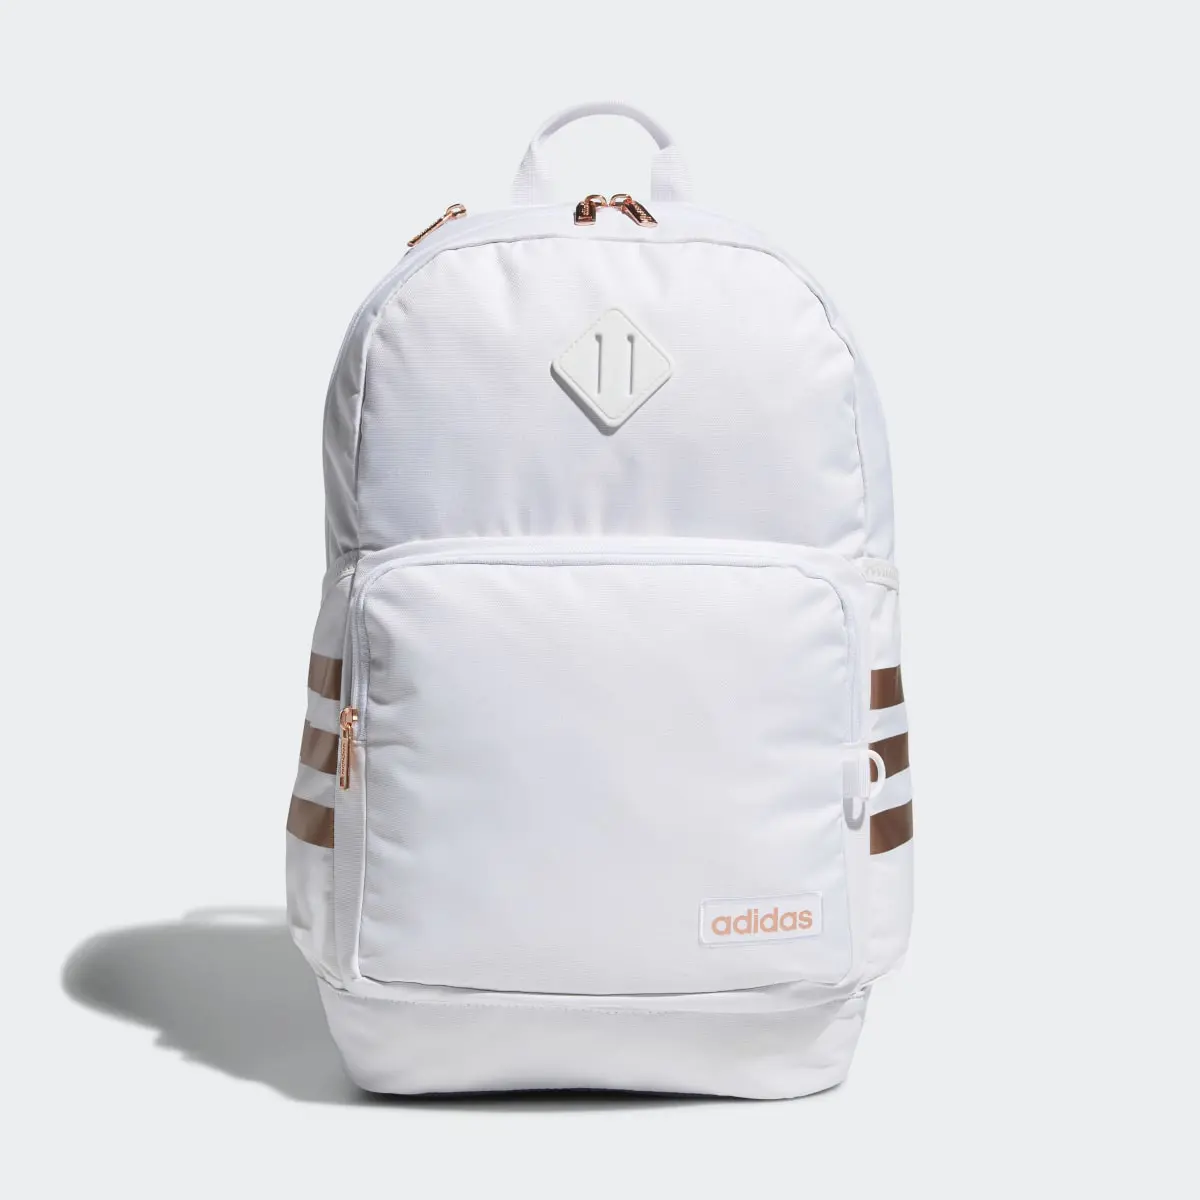 Adidas Classic 3-Stripes Backpack. 2